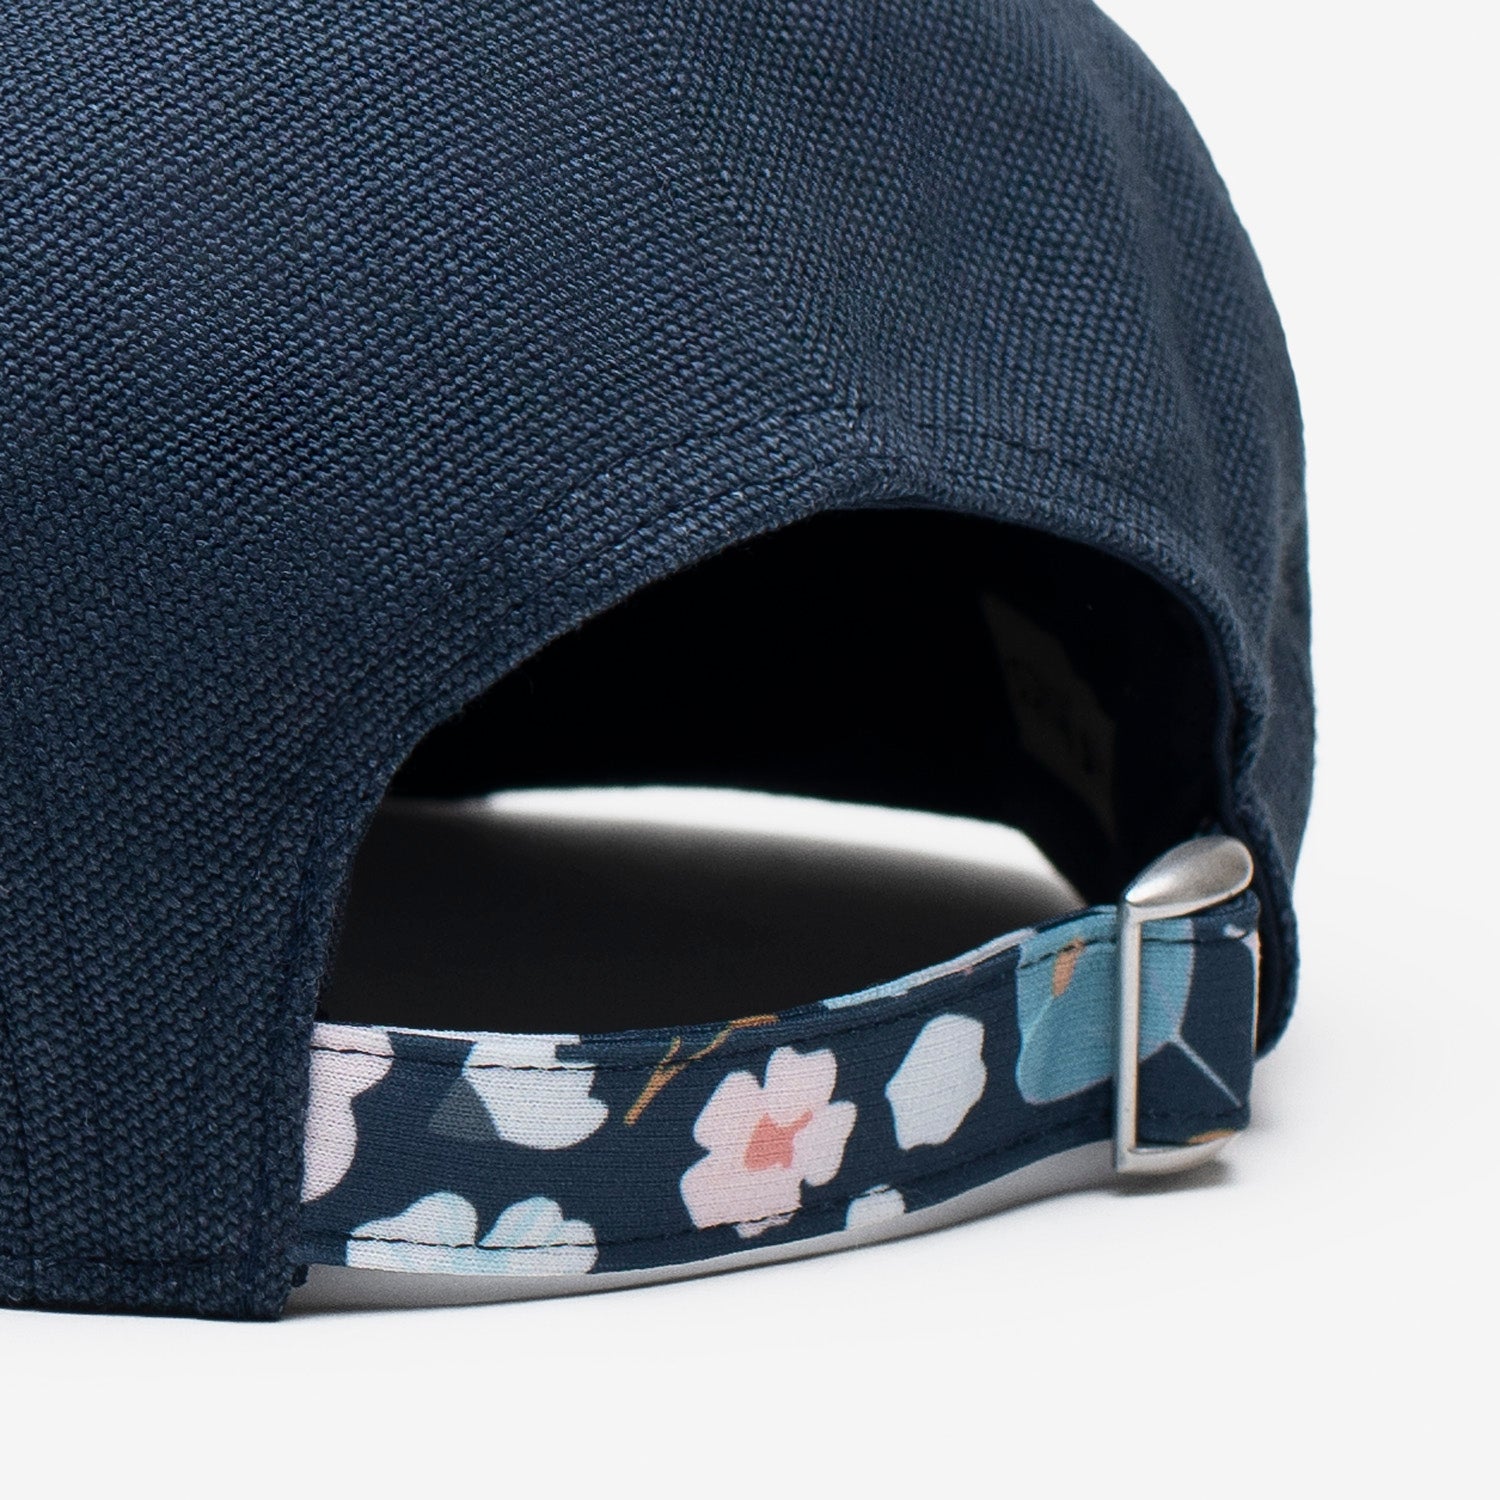 The Blossom 5-Panel – storied hats